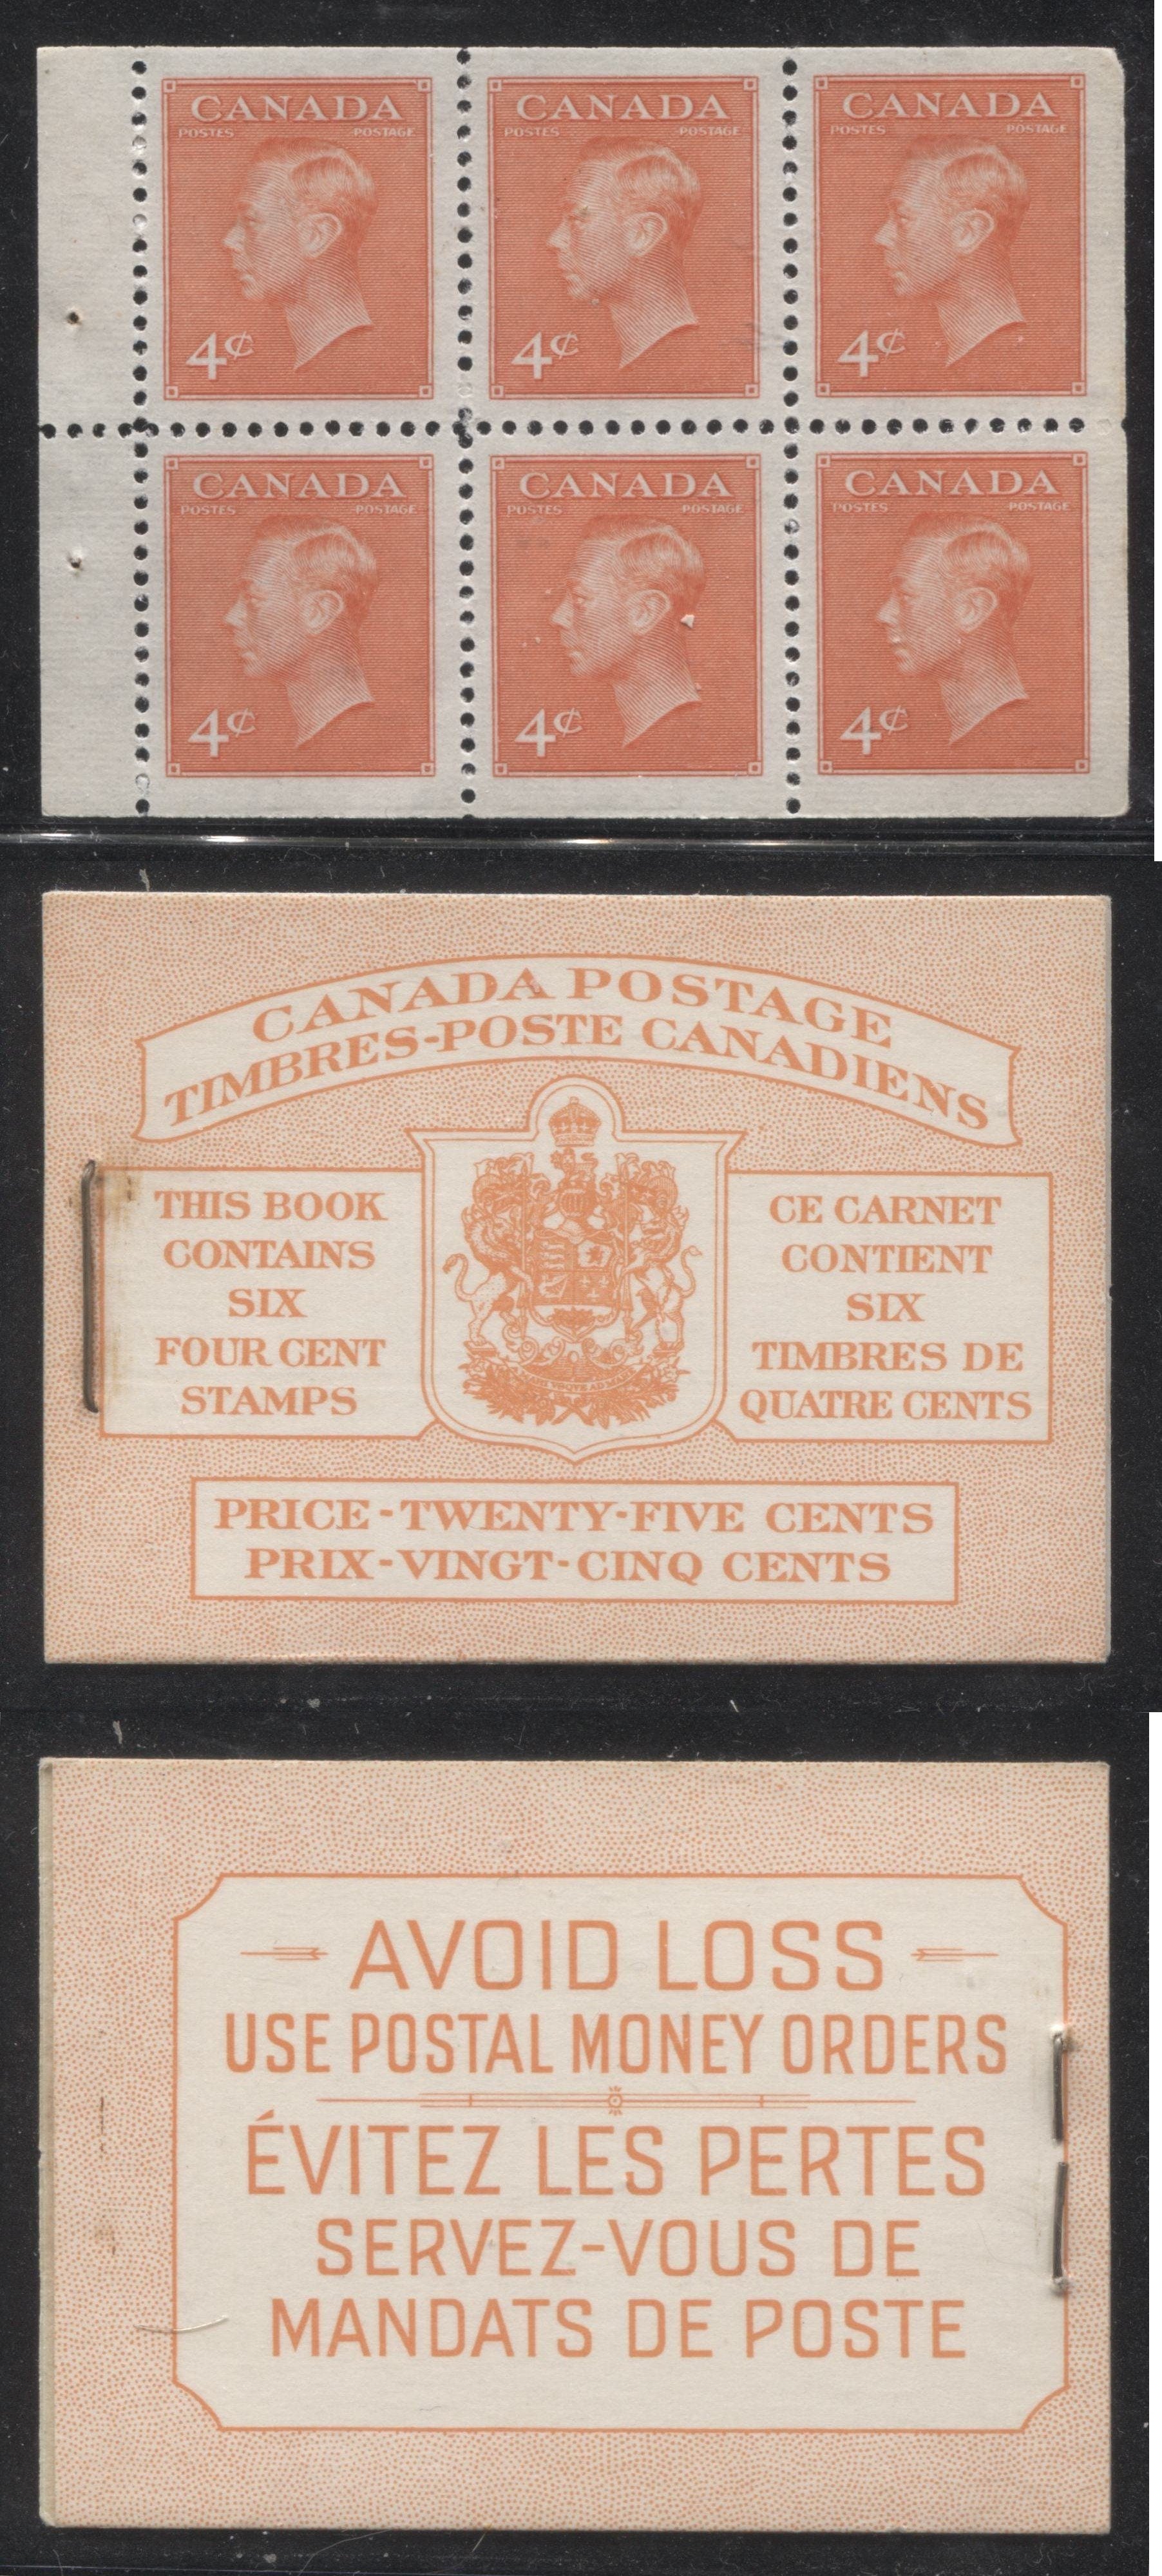 Canada #BK42a 1949-1953 Postes-Postage Issue Complete 25c, Bilingual Booklet Containing 1 Pane of 6 of the 4c Orange King George VI Harris Front Cover Type IIIf , Back Cover Gi, No Rate Page Brixton Chrome 